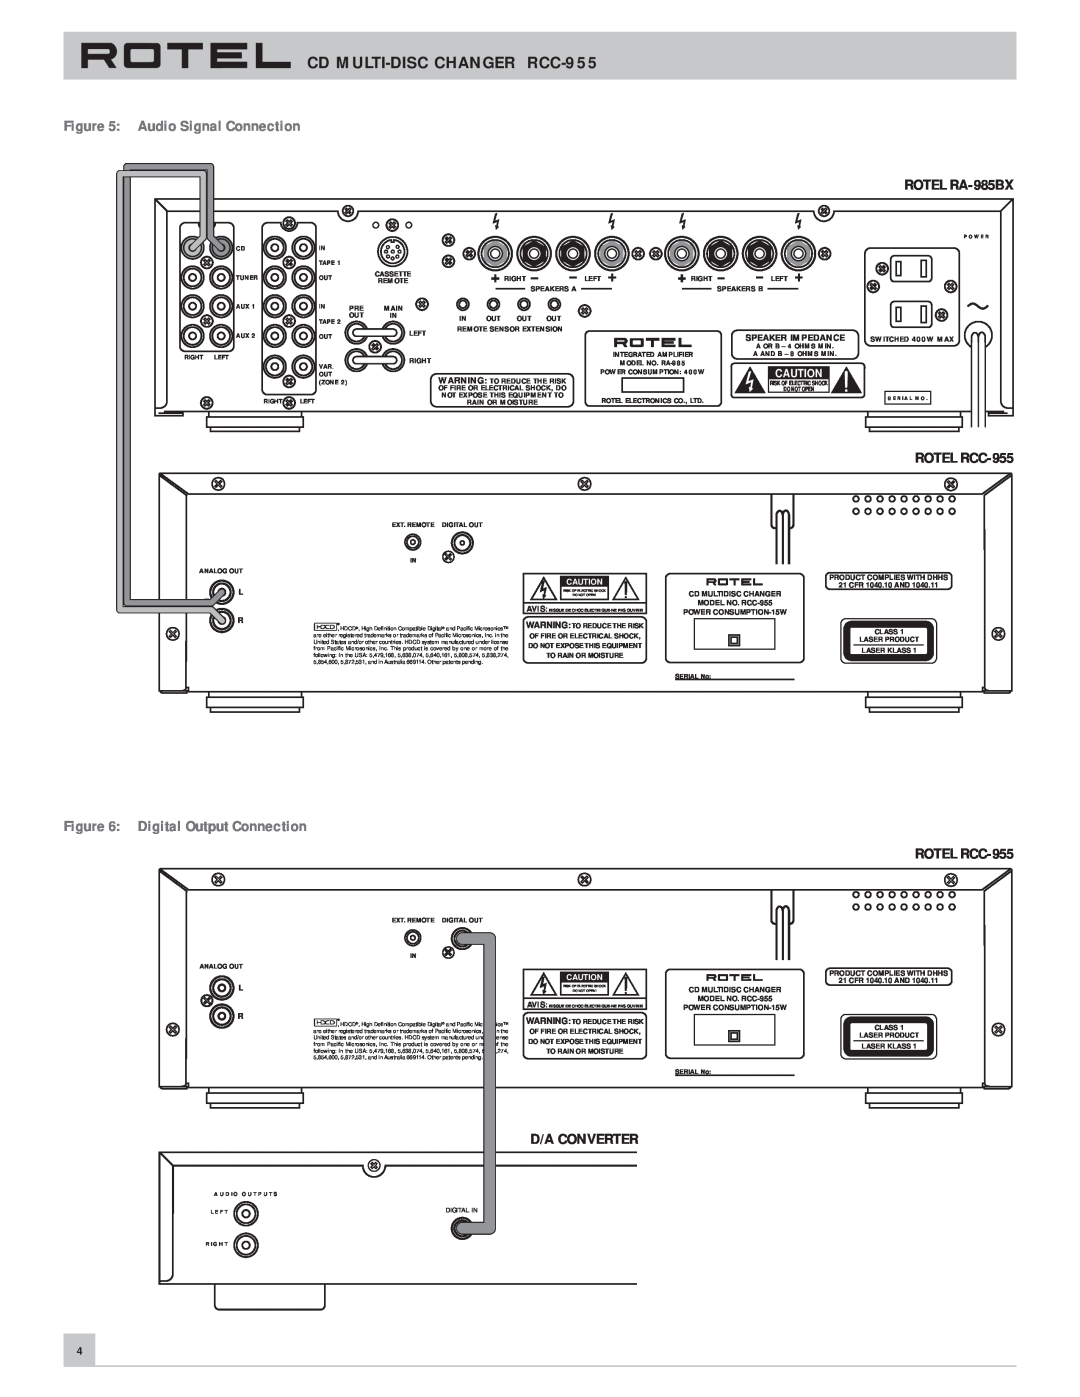 Rotel owner manual Audio Signal Connection, ROTEL RA-985BX, ROTEL RCC-955, Digital Output Connection, D/A Converter 